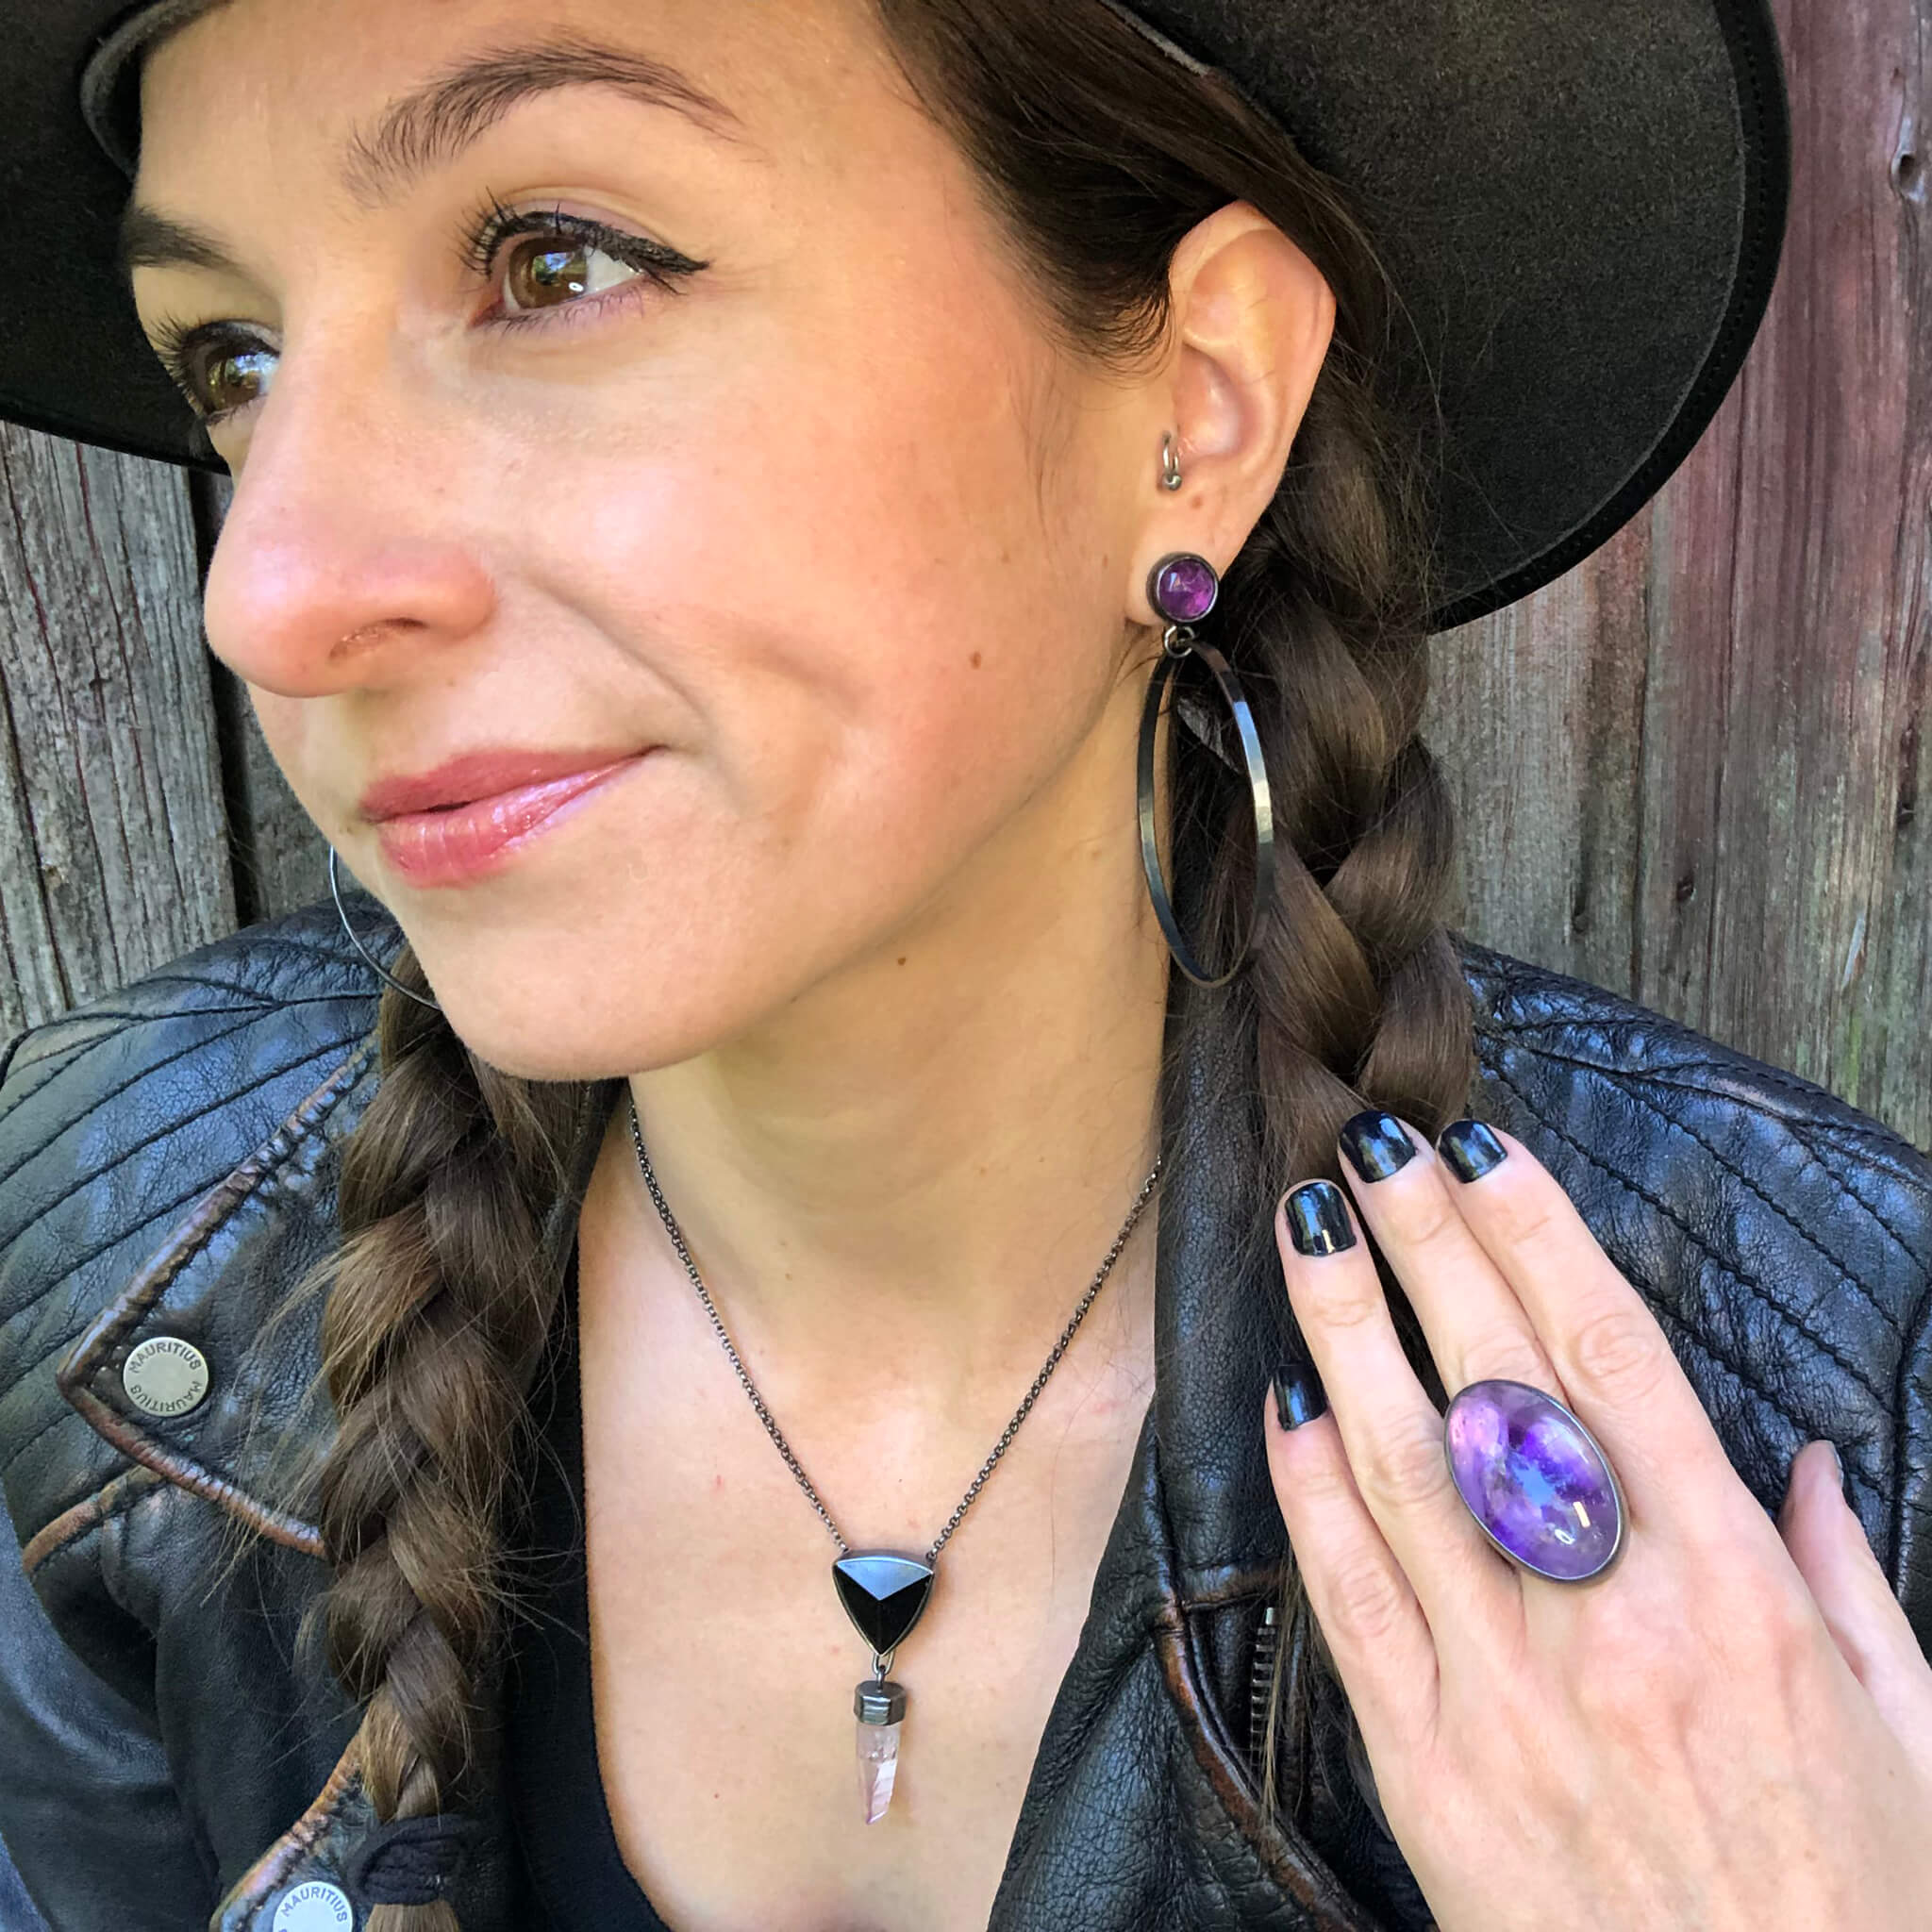 Amethyst Amulet Ring. Season of the Witch collection by Alex Lozier Jewelry.